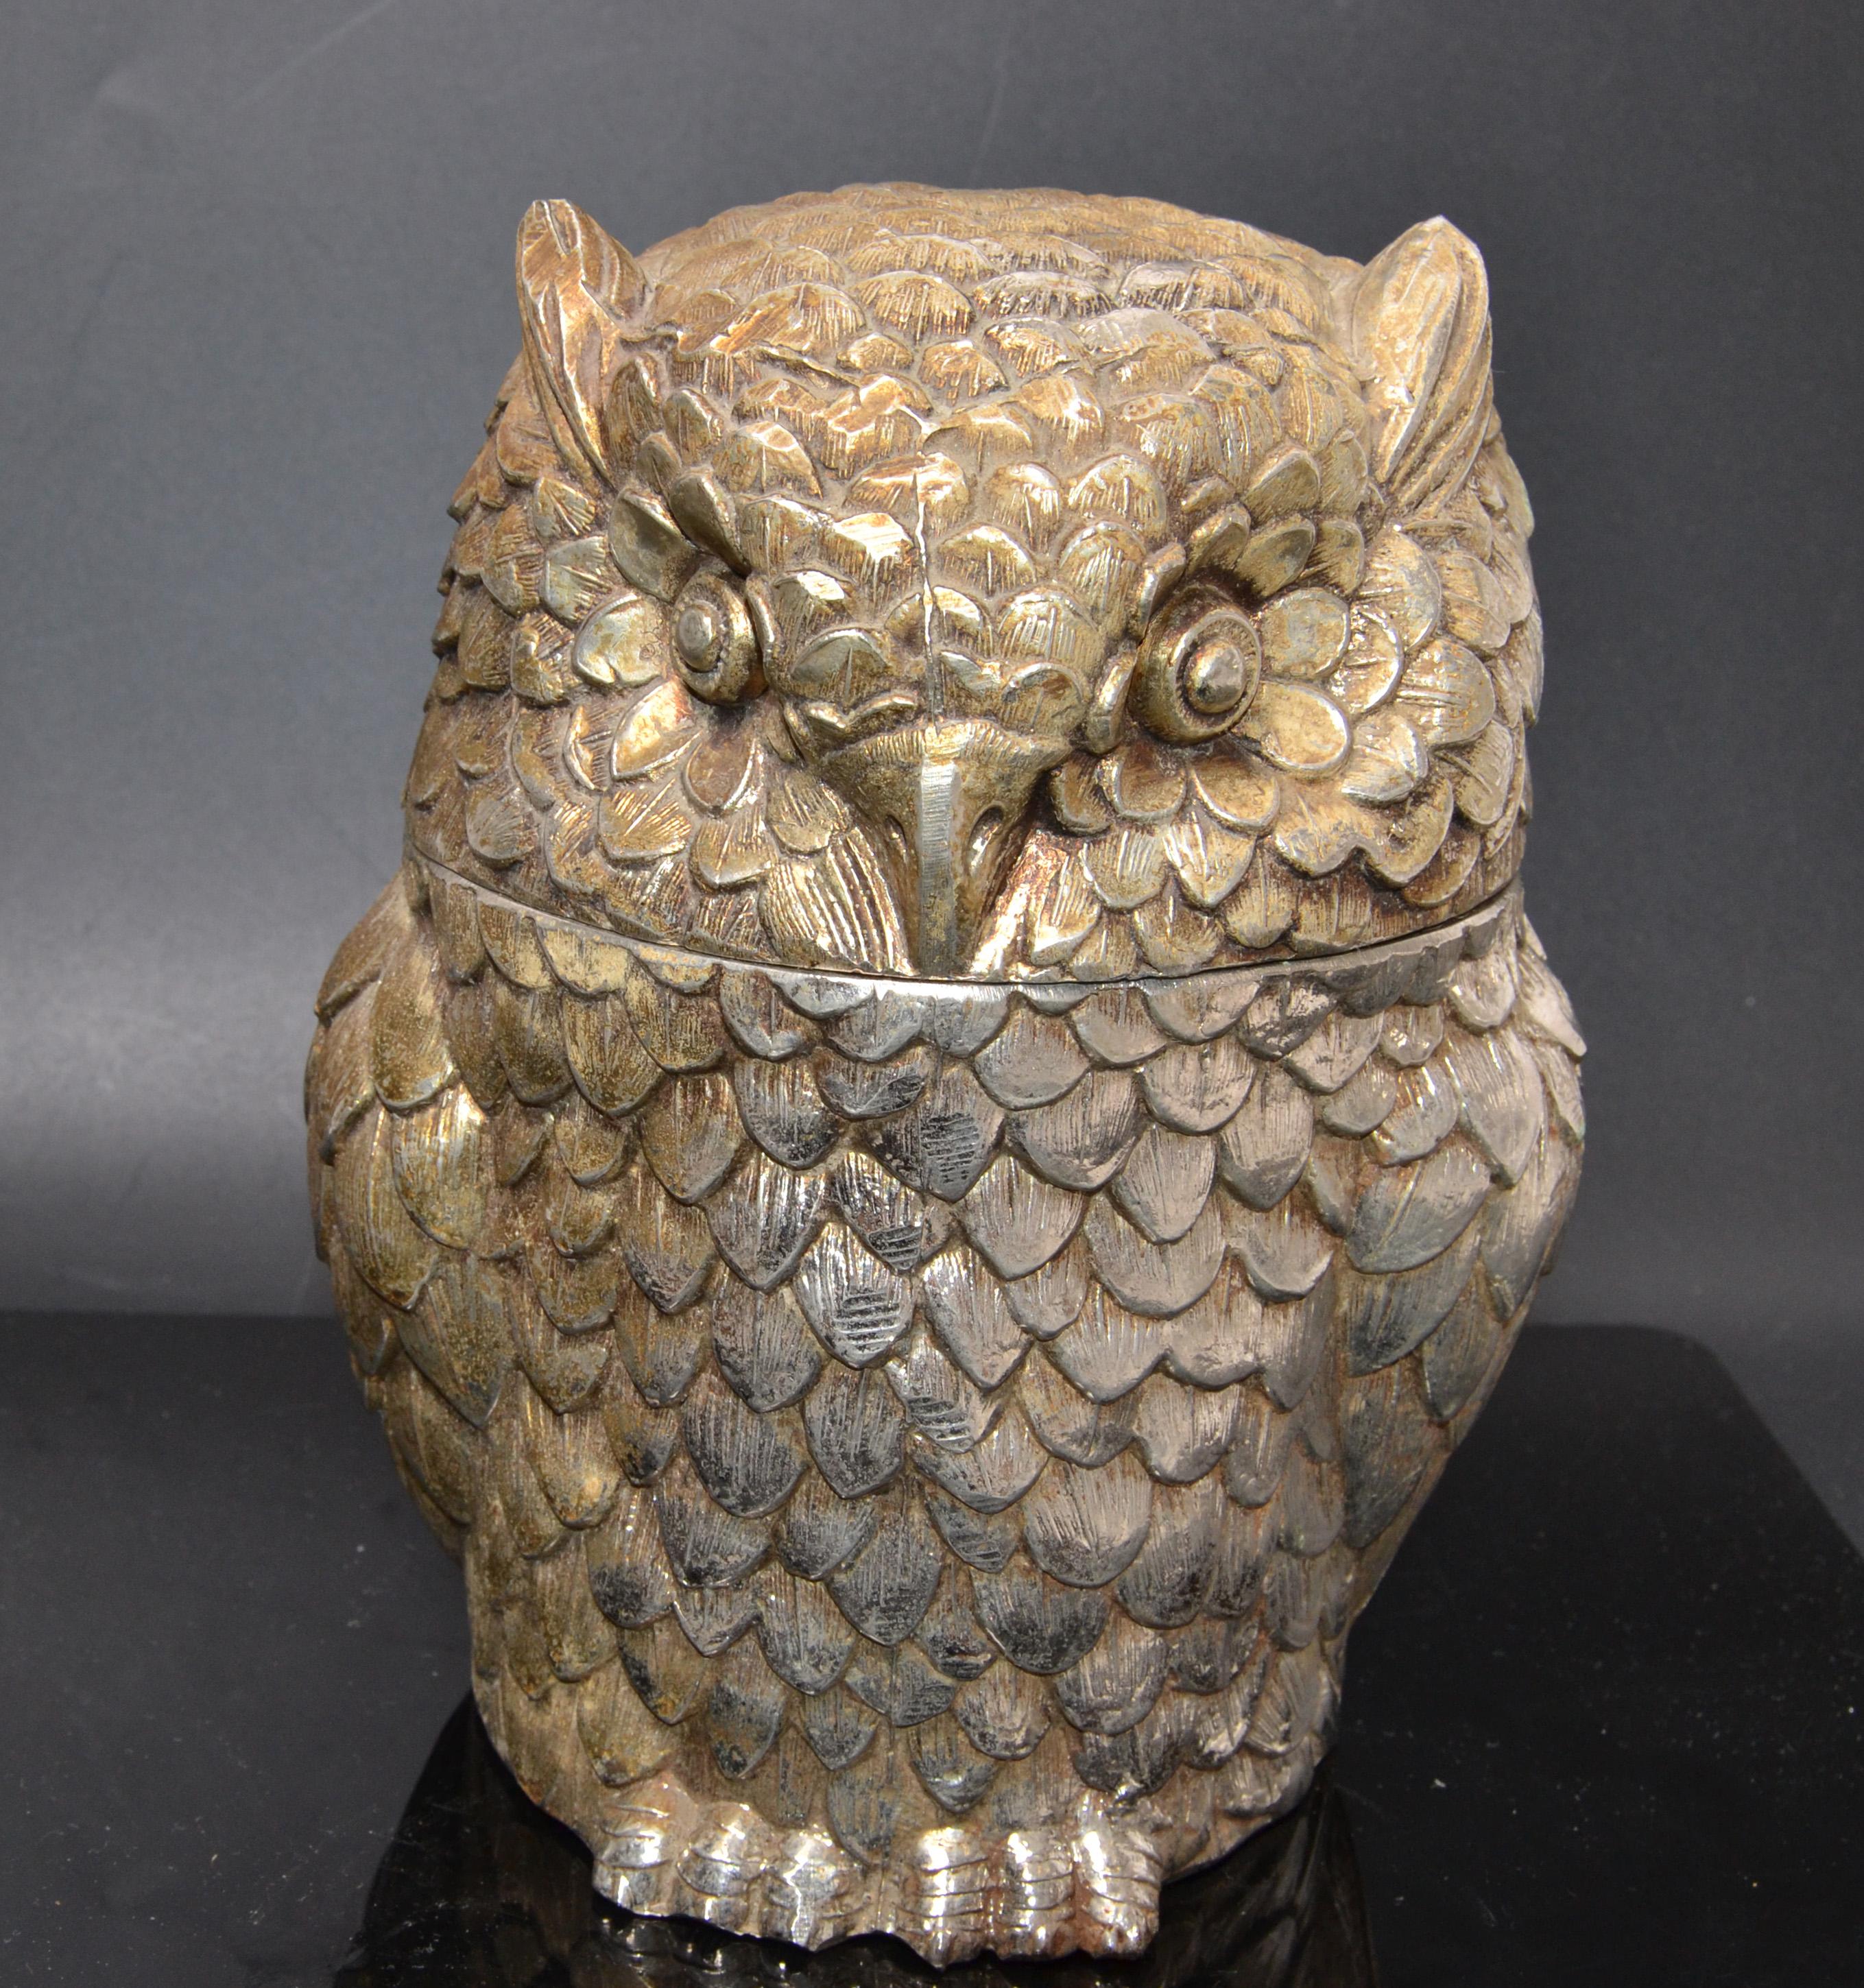 1940s original Mauro Manetti gold plate owl ice bucket with metal insulation, made in Italy.
Keeps the ice cubes frozen for a long time as the lid sits tight on the bucket.
Highly favored Collectors treasure.
  